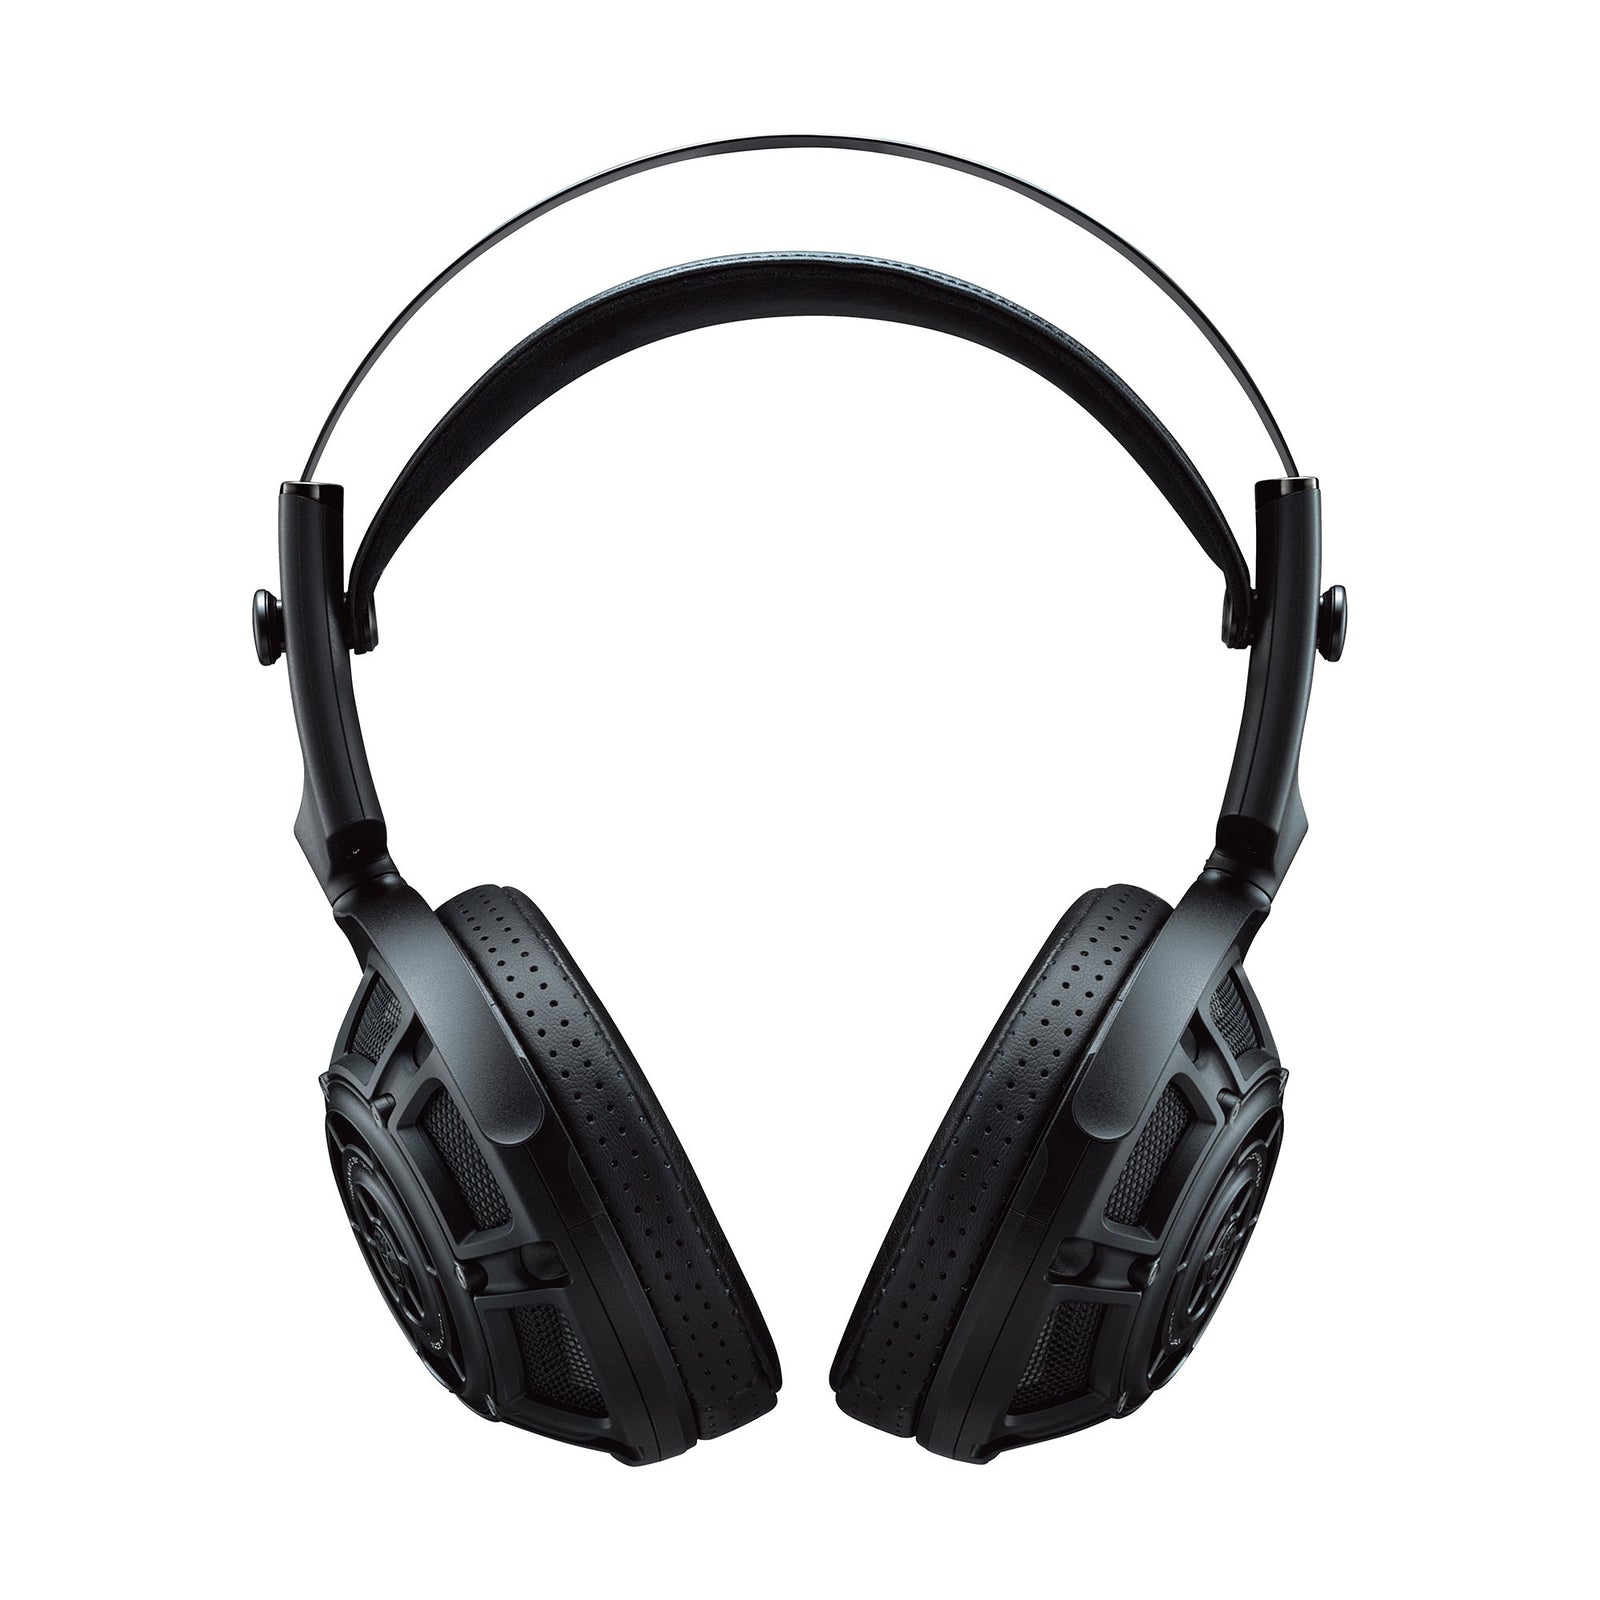 YAMAHA YH5000SE - HEADPHONES | VINYL SOUND Flagship Headphone that offers ultimate True Sound using an ORTHODYNAMIC™ driver. Yamaha True Sound allows you to immerse yourself in a world of sound and music Yamaha ORTHODYNAMIC™ driver provides sonic accuracy and enables ultra-responsive performance Ultra-lightweight